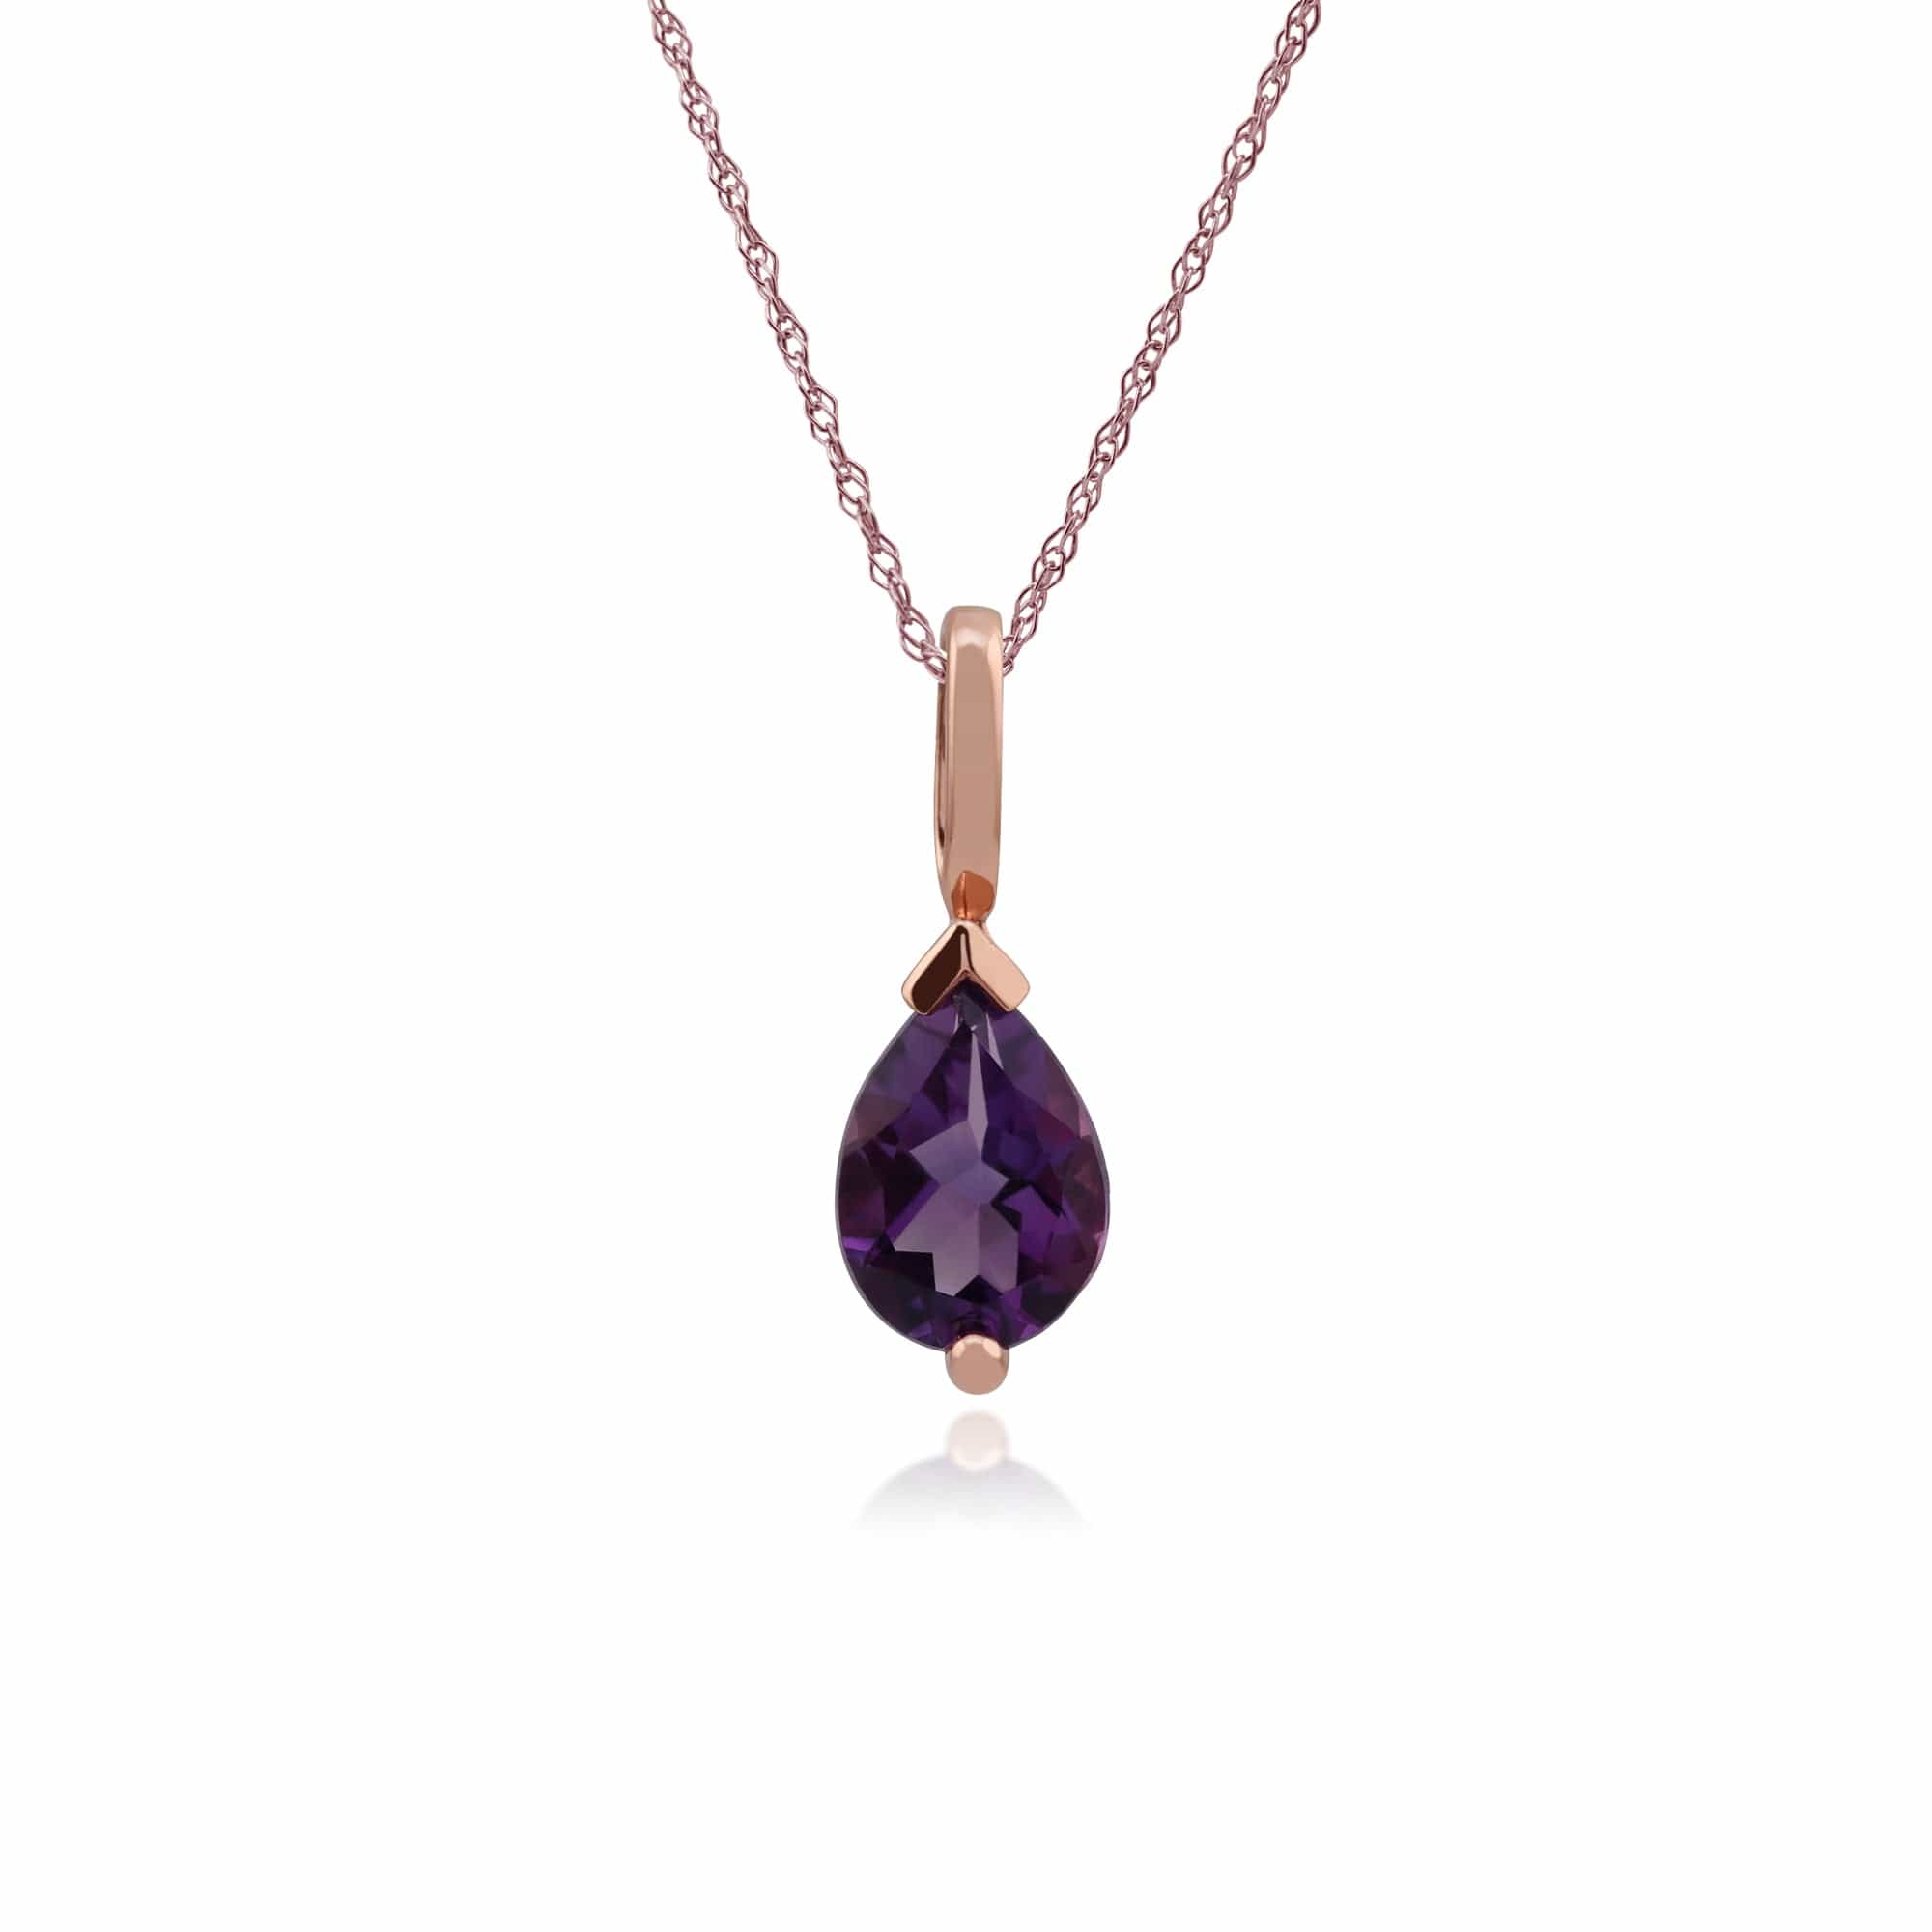 Photos - Pendant / Choker Necklace Classic Pear Amethyst Claw Set Single Stone Pendant in 9ct Rose Gold